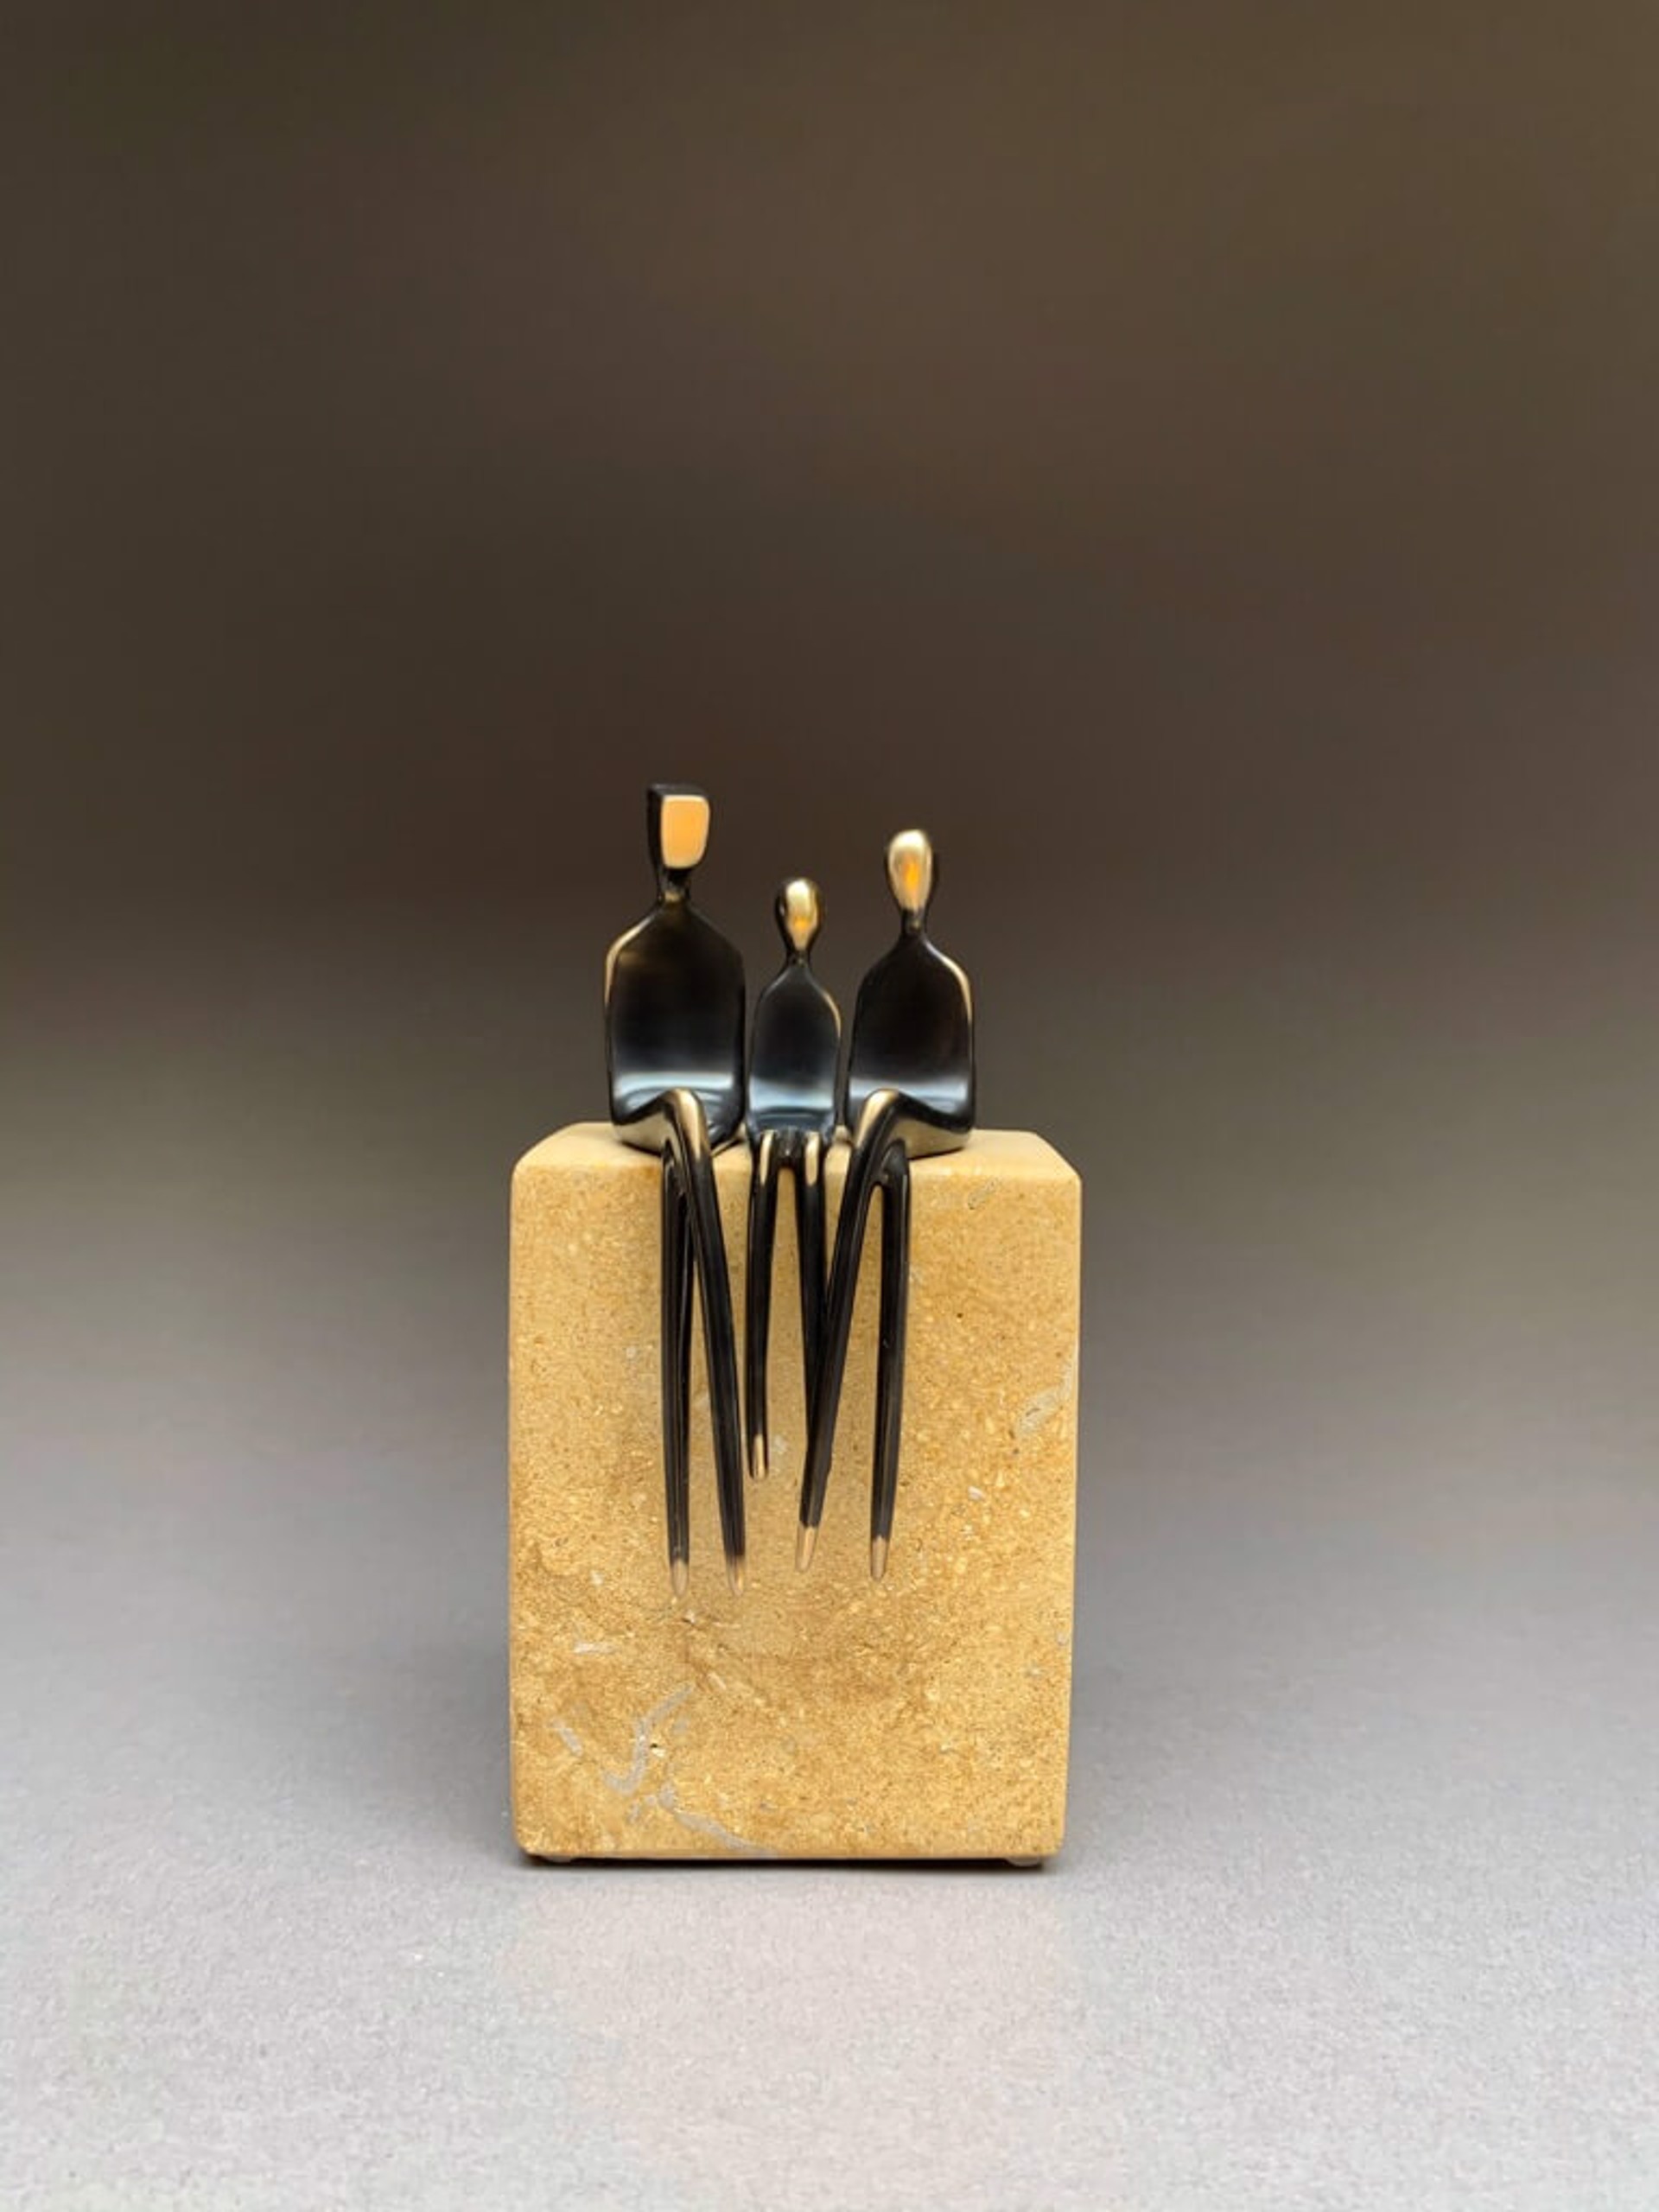 Family of Three ~ Mounted on Tan Limestone by Yenny Cocq